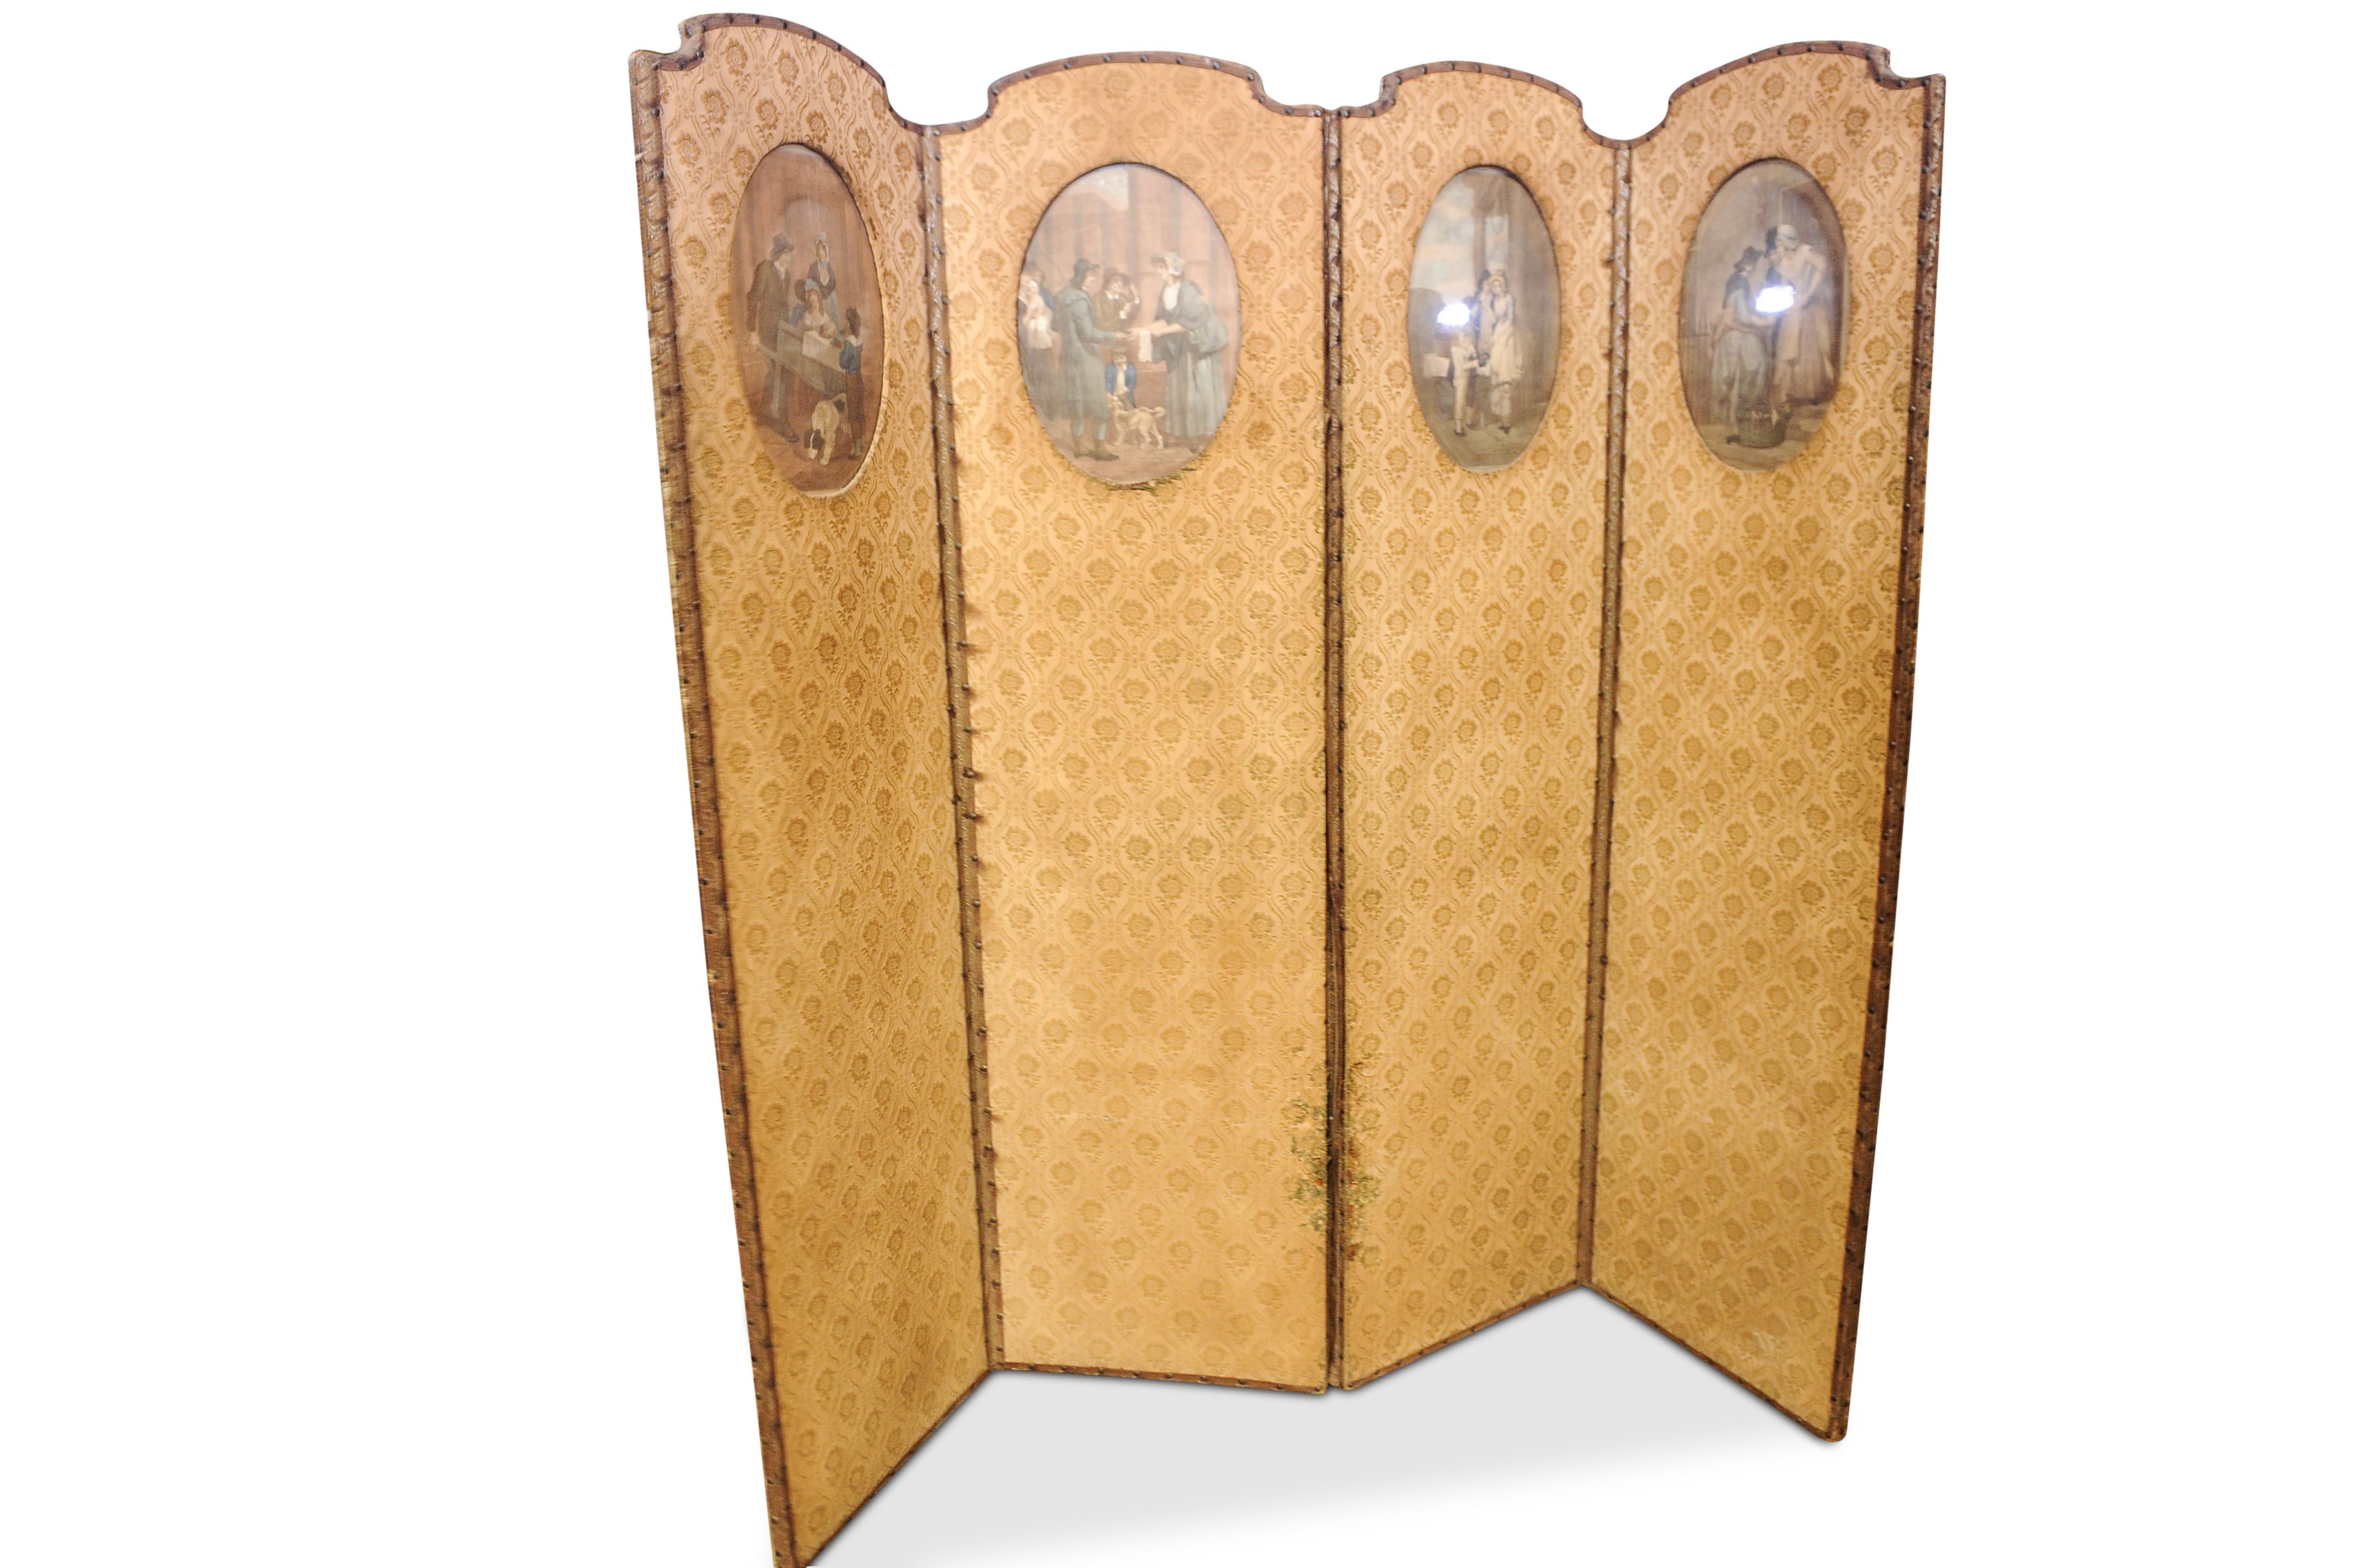 A Rare Find A Georgian Upholstered Four Fold Room Divider Boudoir Screen With A Shaped Top, Each Fold Featuring Circular 